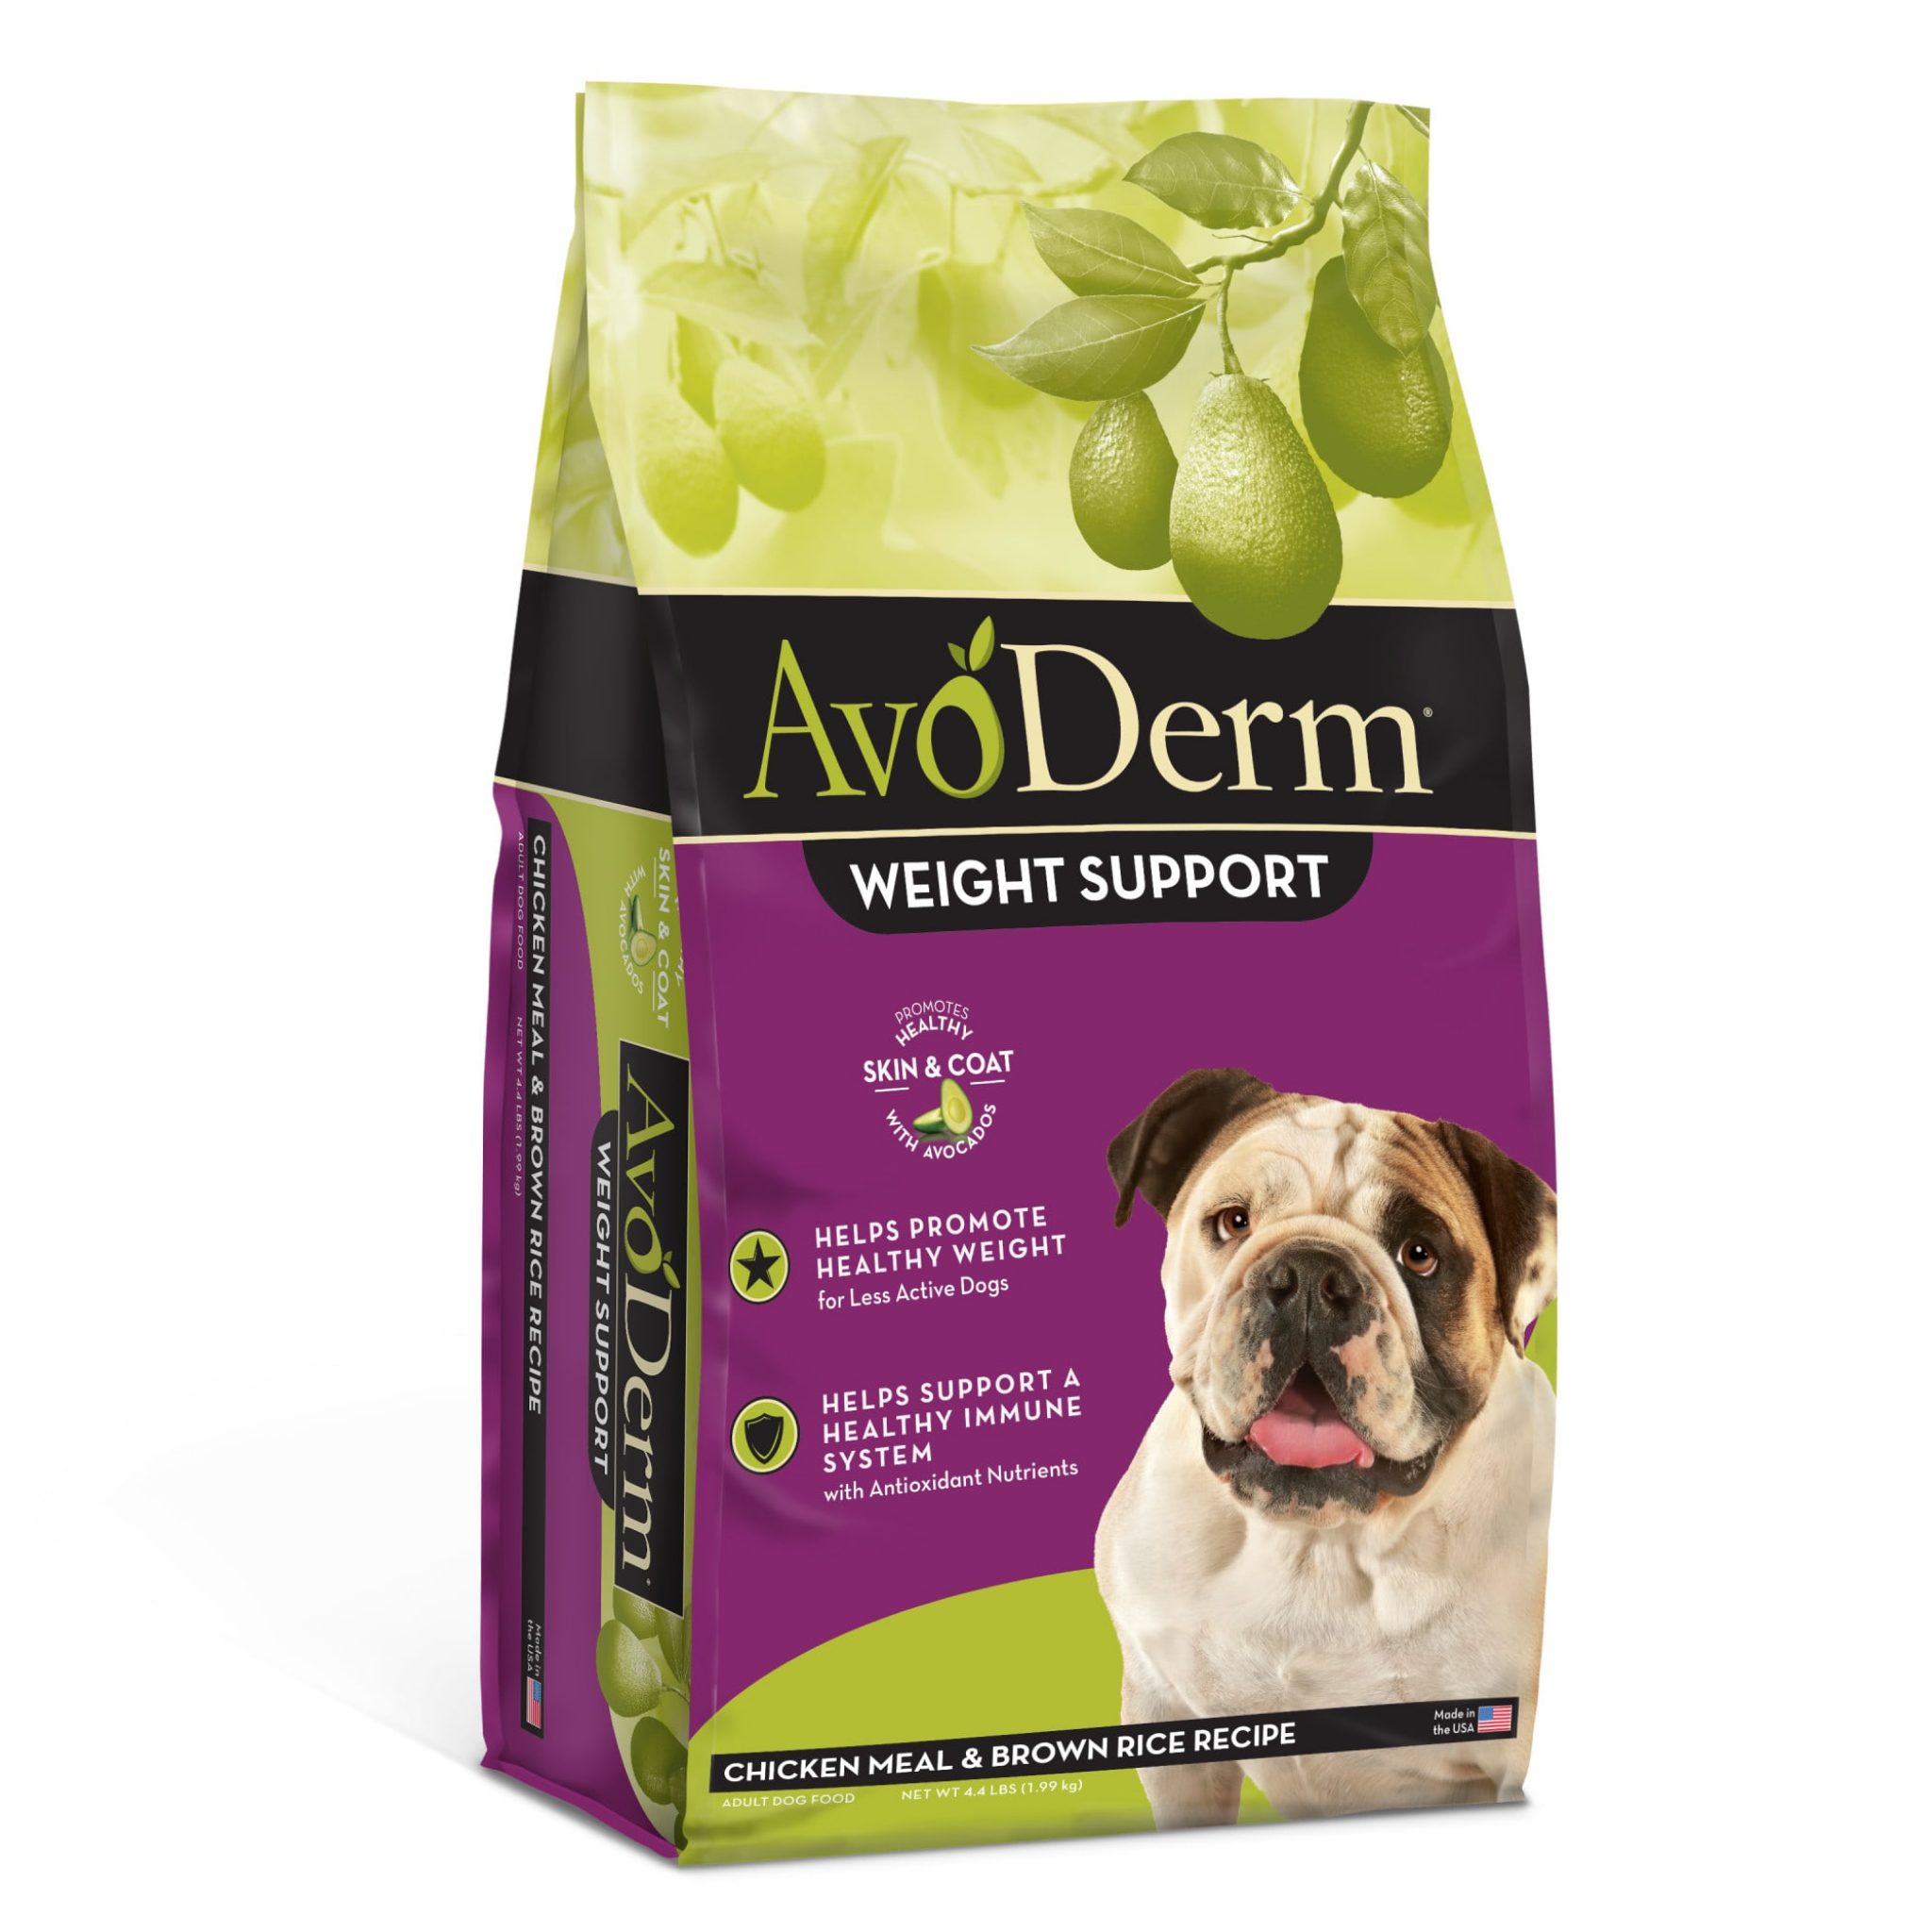 AvoDerm Weight Support Chicken Meal & Brown Rice Recipe Dry Dog Food, 4